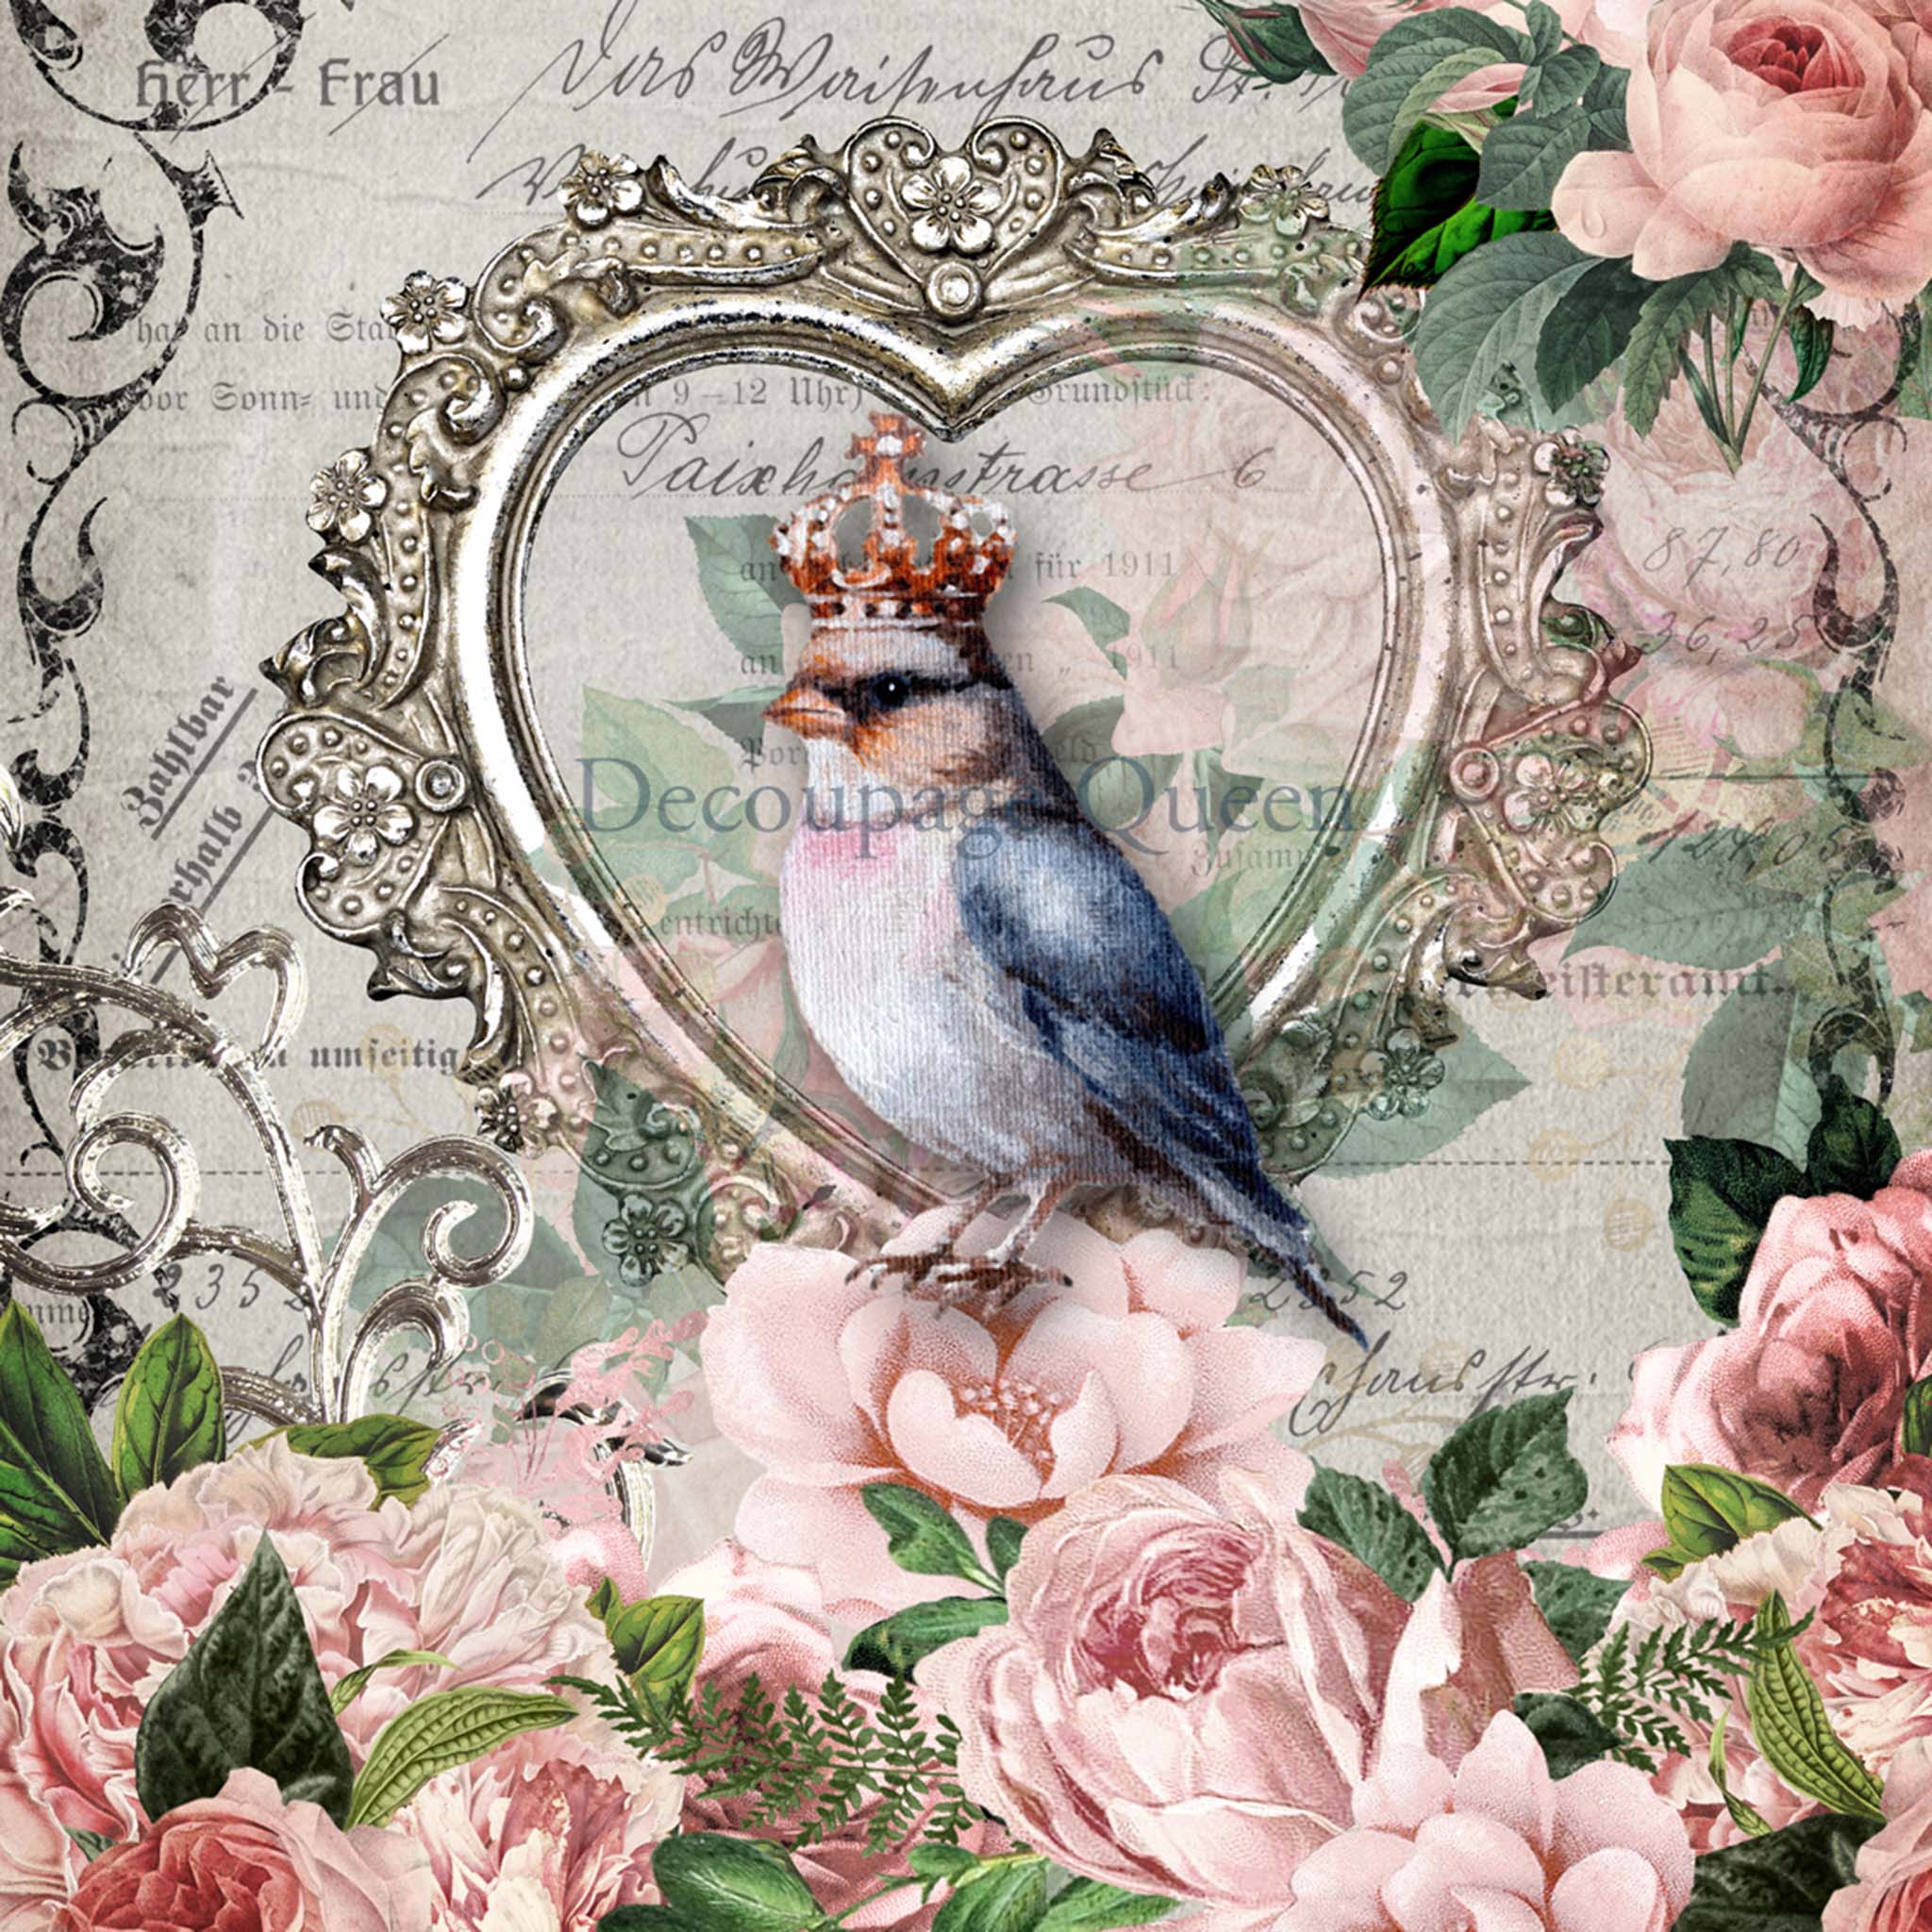 Close-up of an A2 rice paper design that features delicate pink roses, a charming bluebird wearing a crown while sitting in a heart picture frame, and a vintage French document.